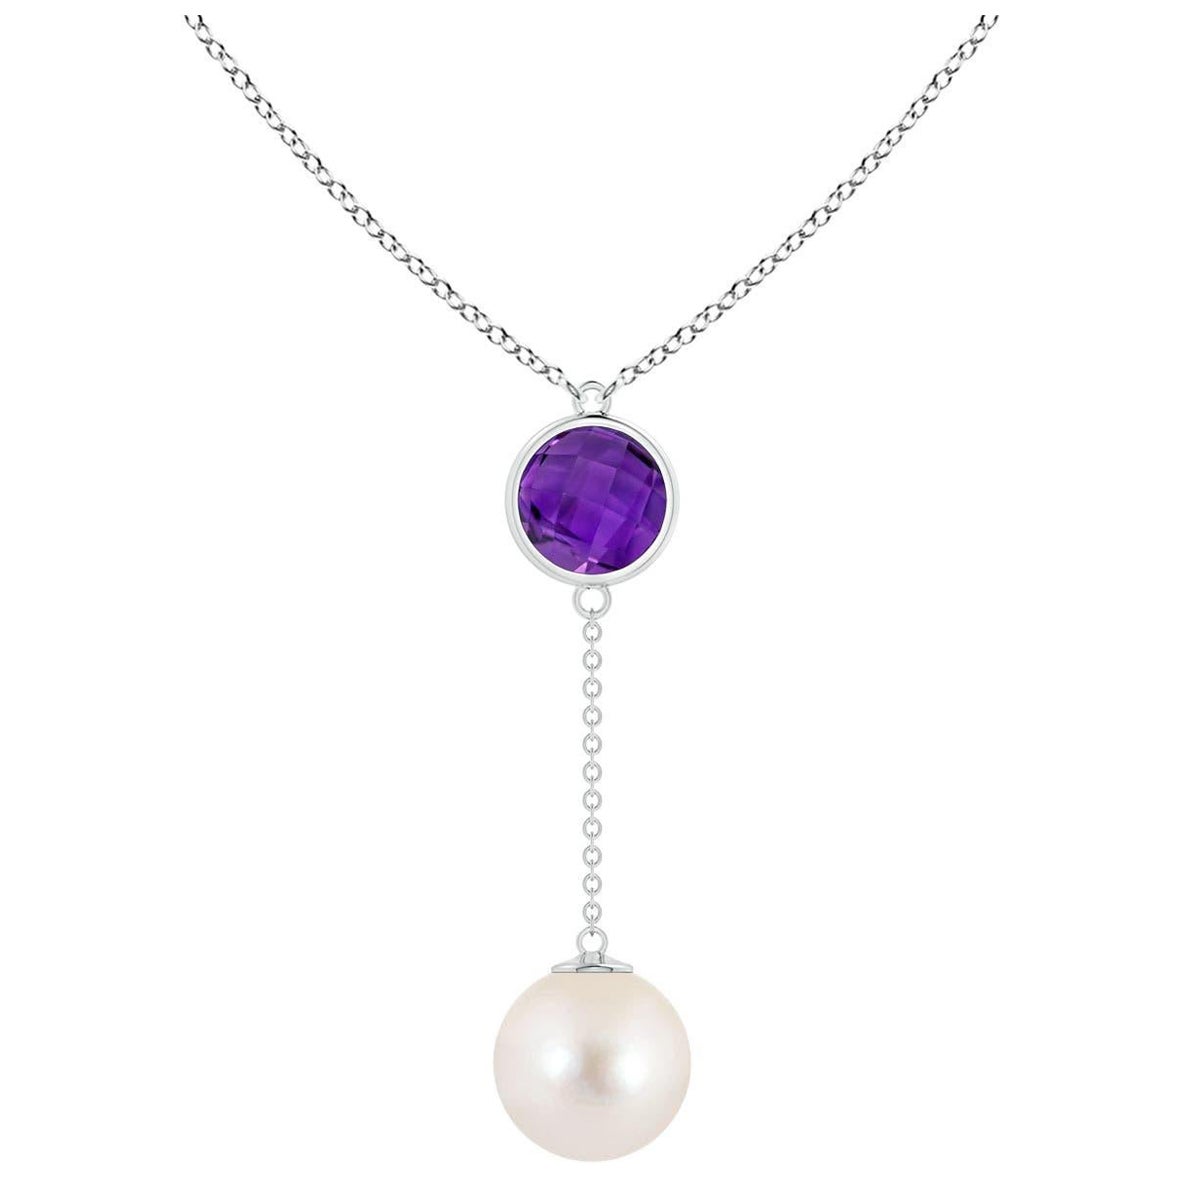 Freshwater Cultured Pearl & 1.65ct Amethyst Lariat Necklace in 14K White Gold